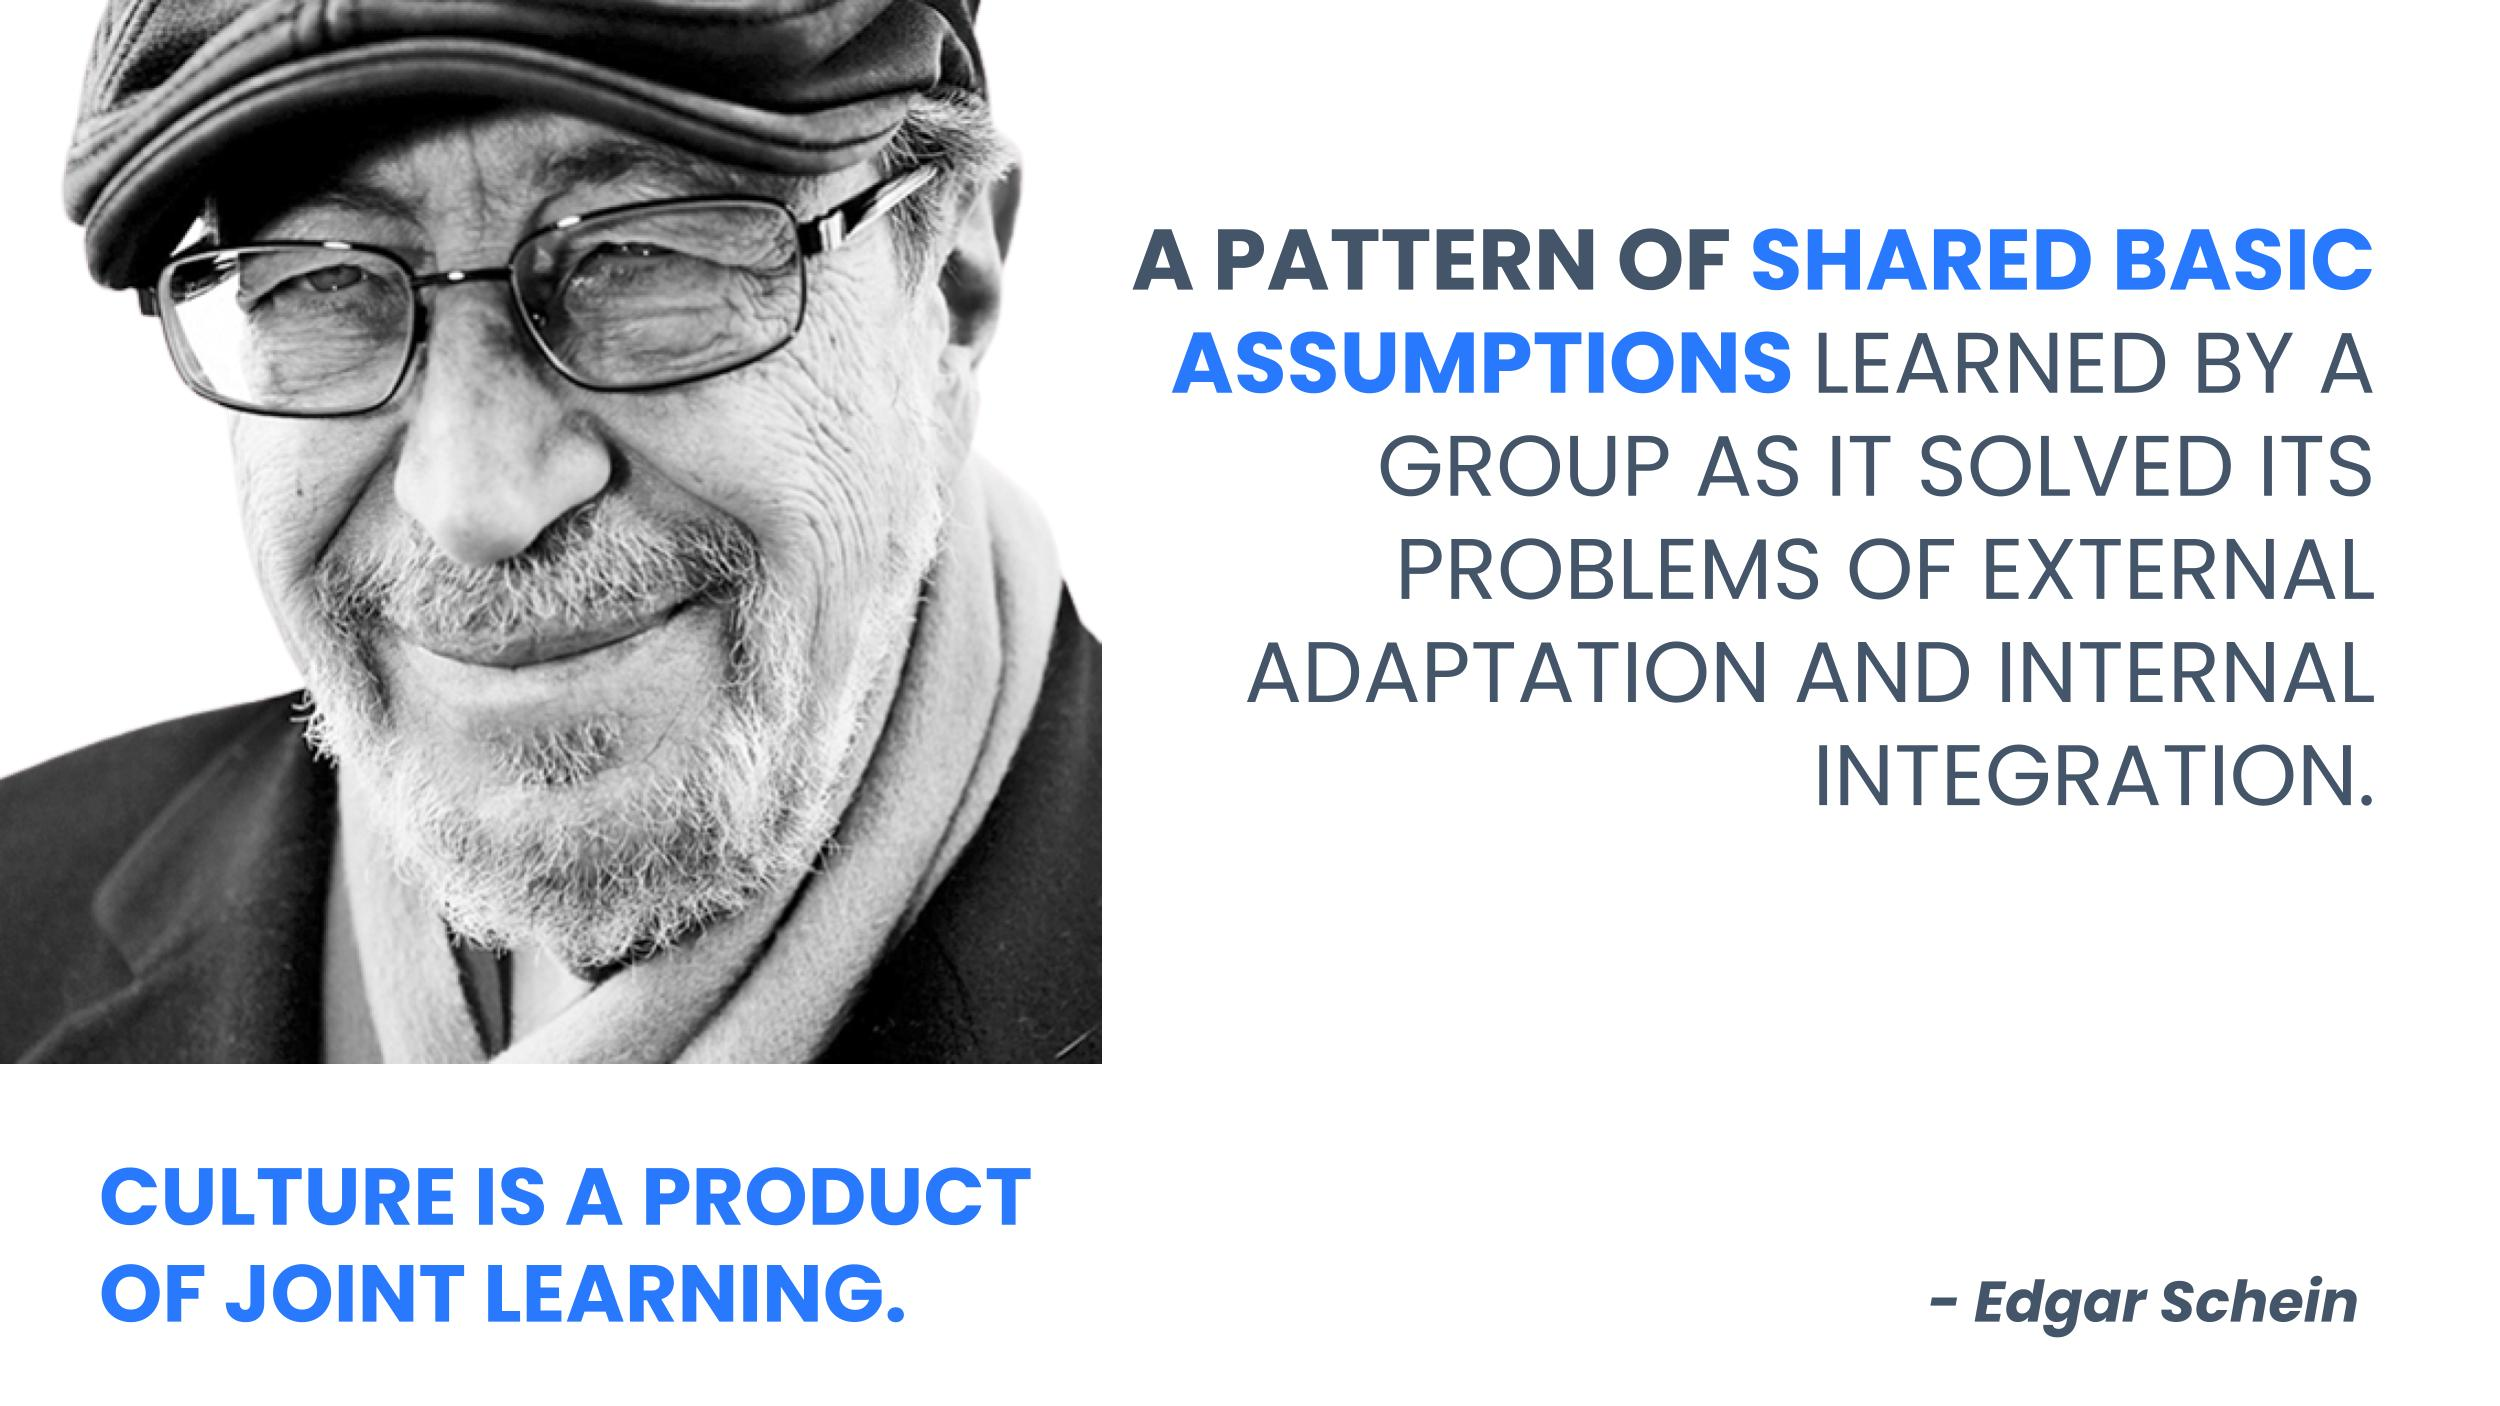 Edgar Schein: Culture is a product of joint learning